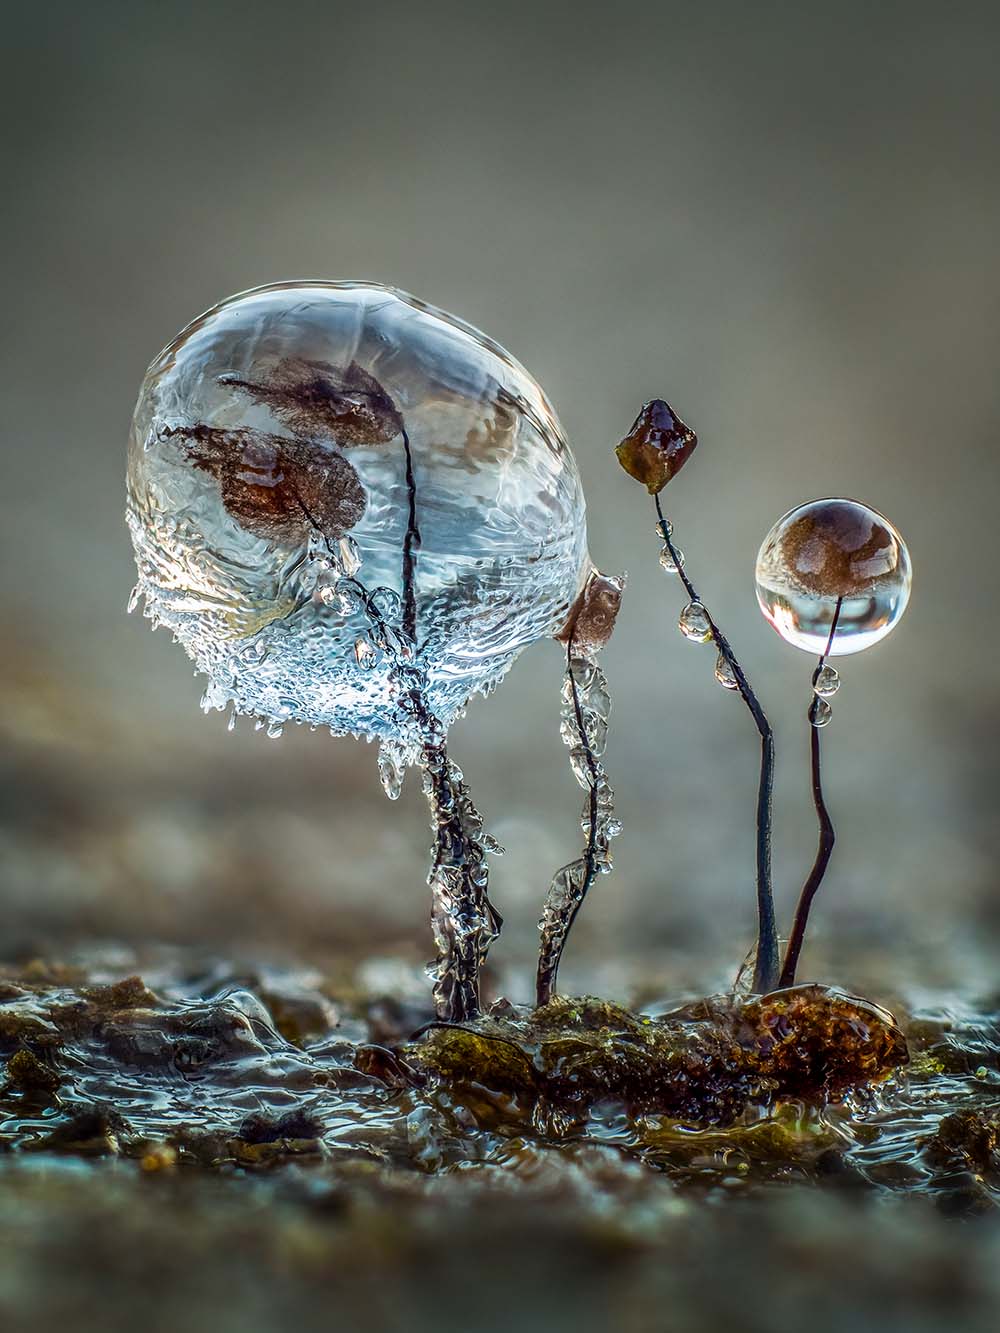 CUPOTY Close-Up Photographer of the Year Fungi category winner Barry Webb